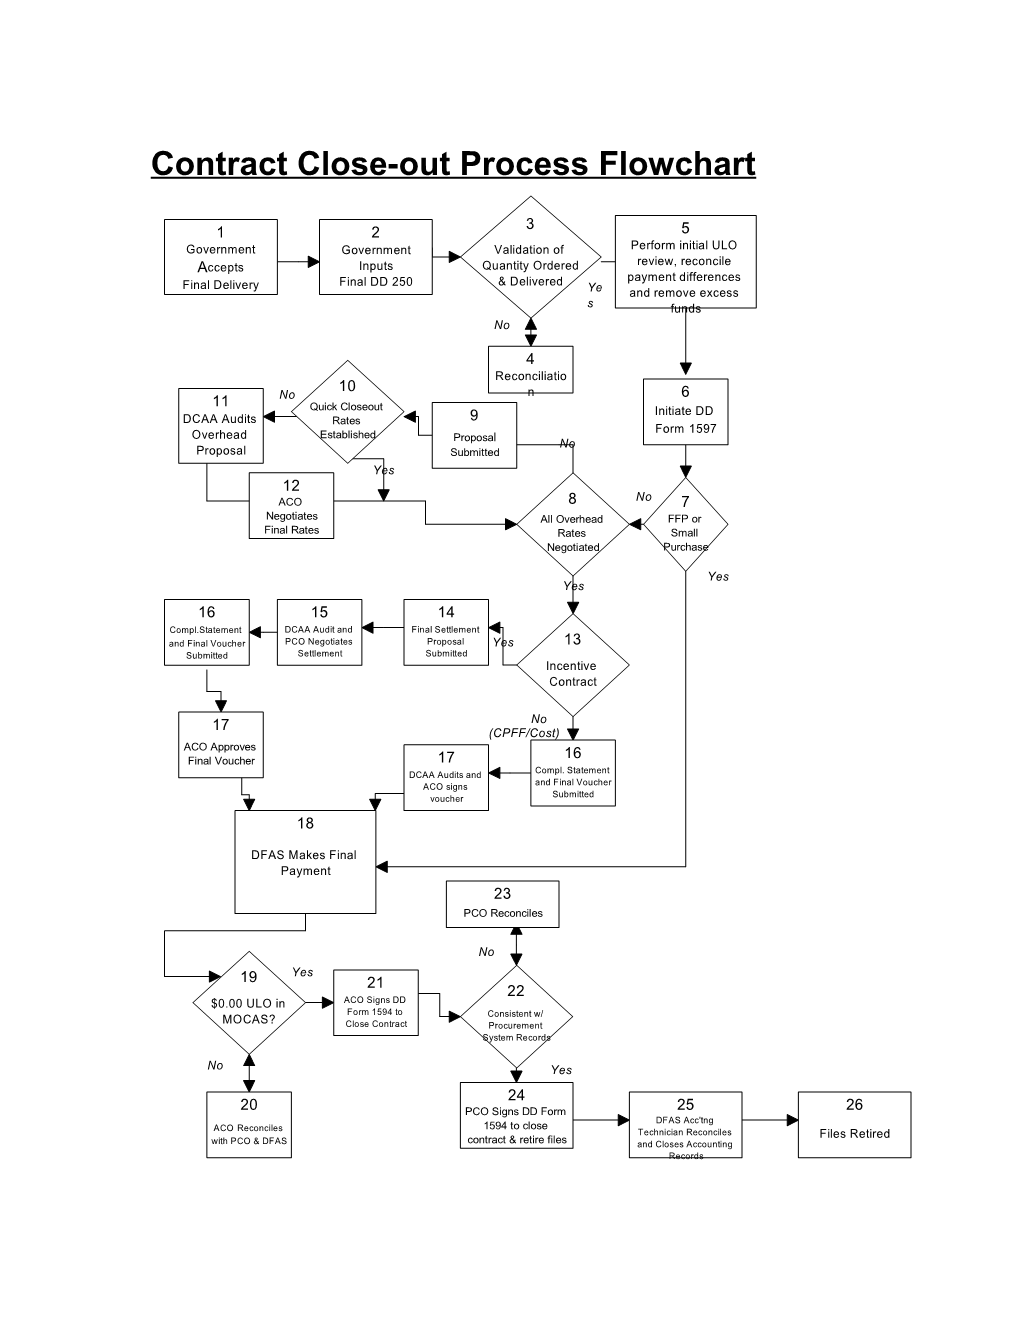 Contract Close-Out Process Flowchart